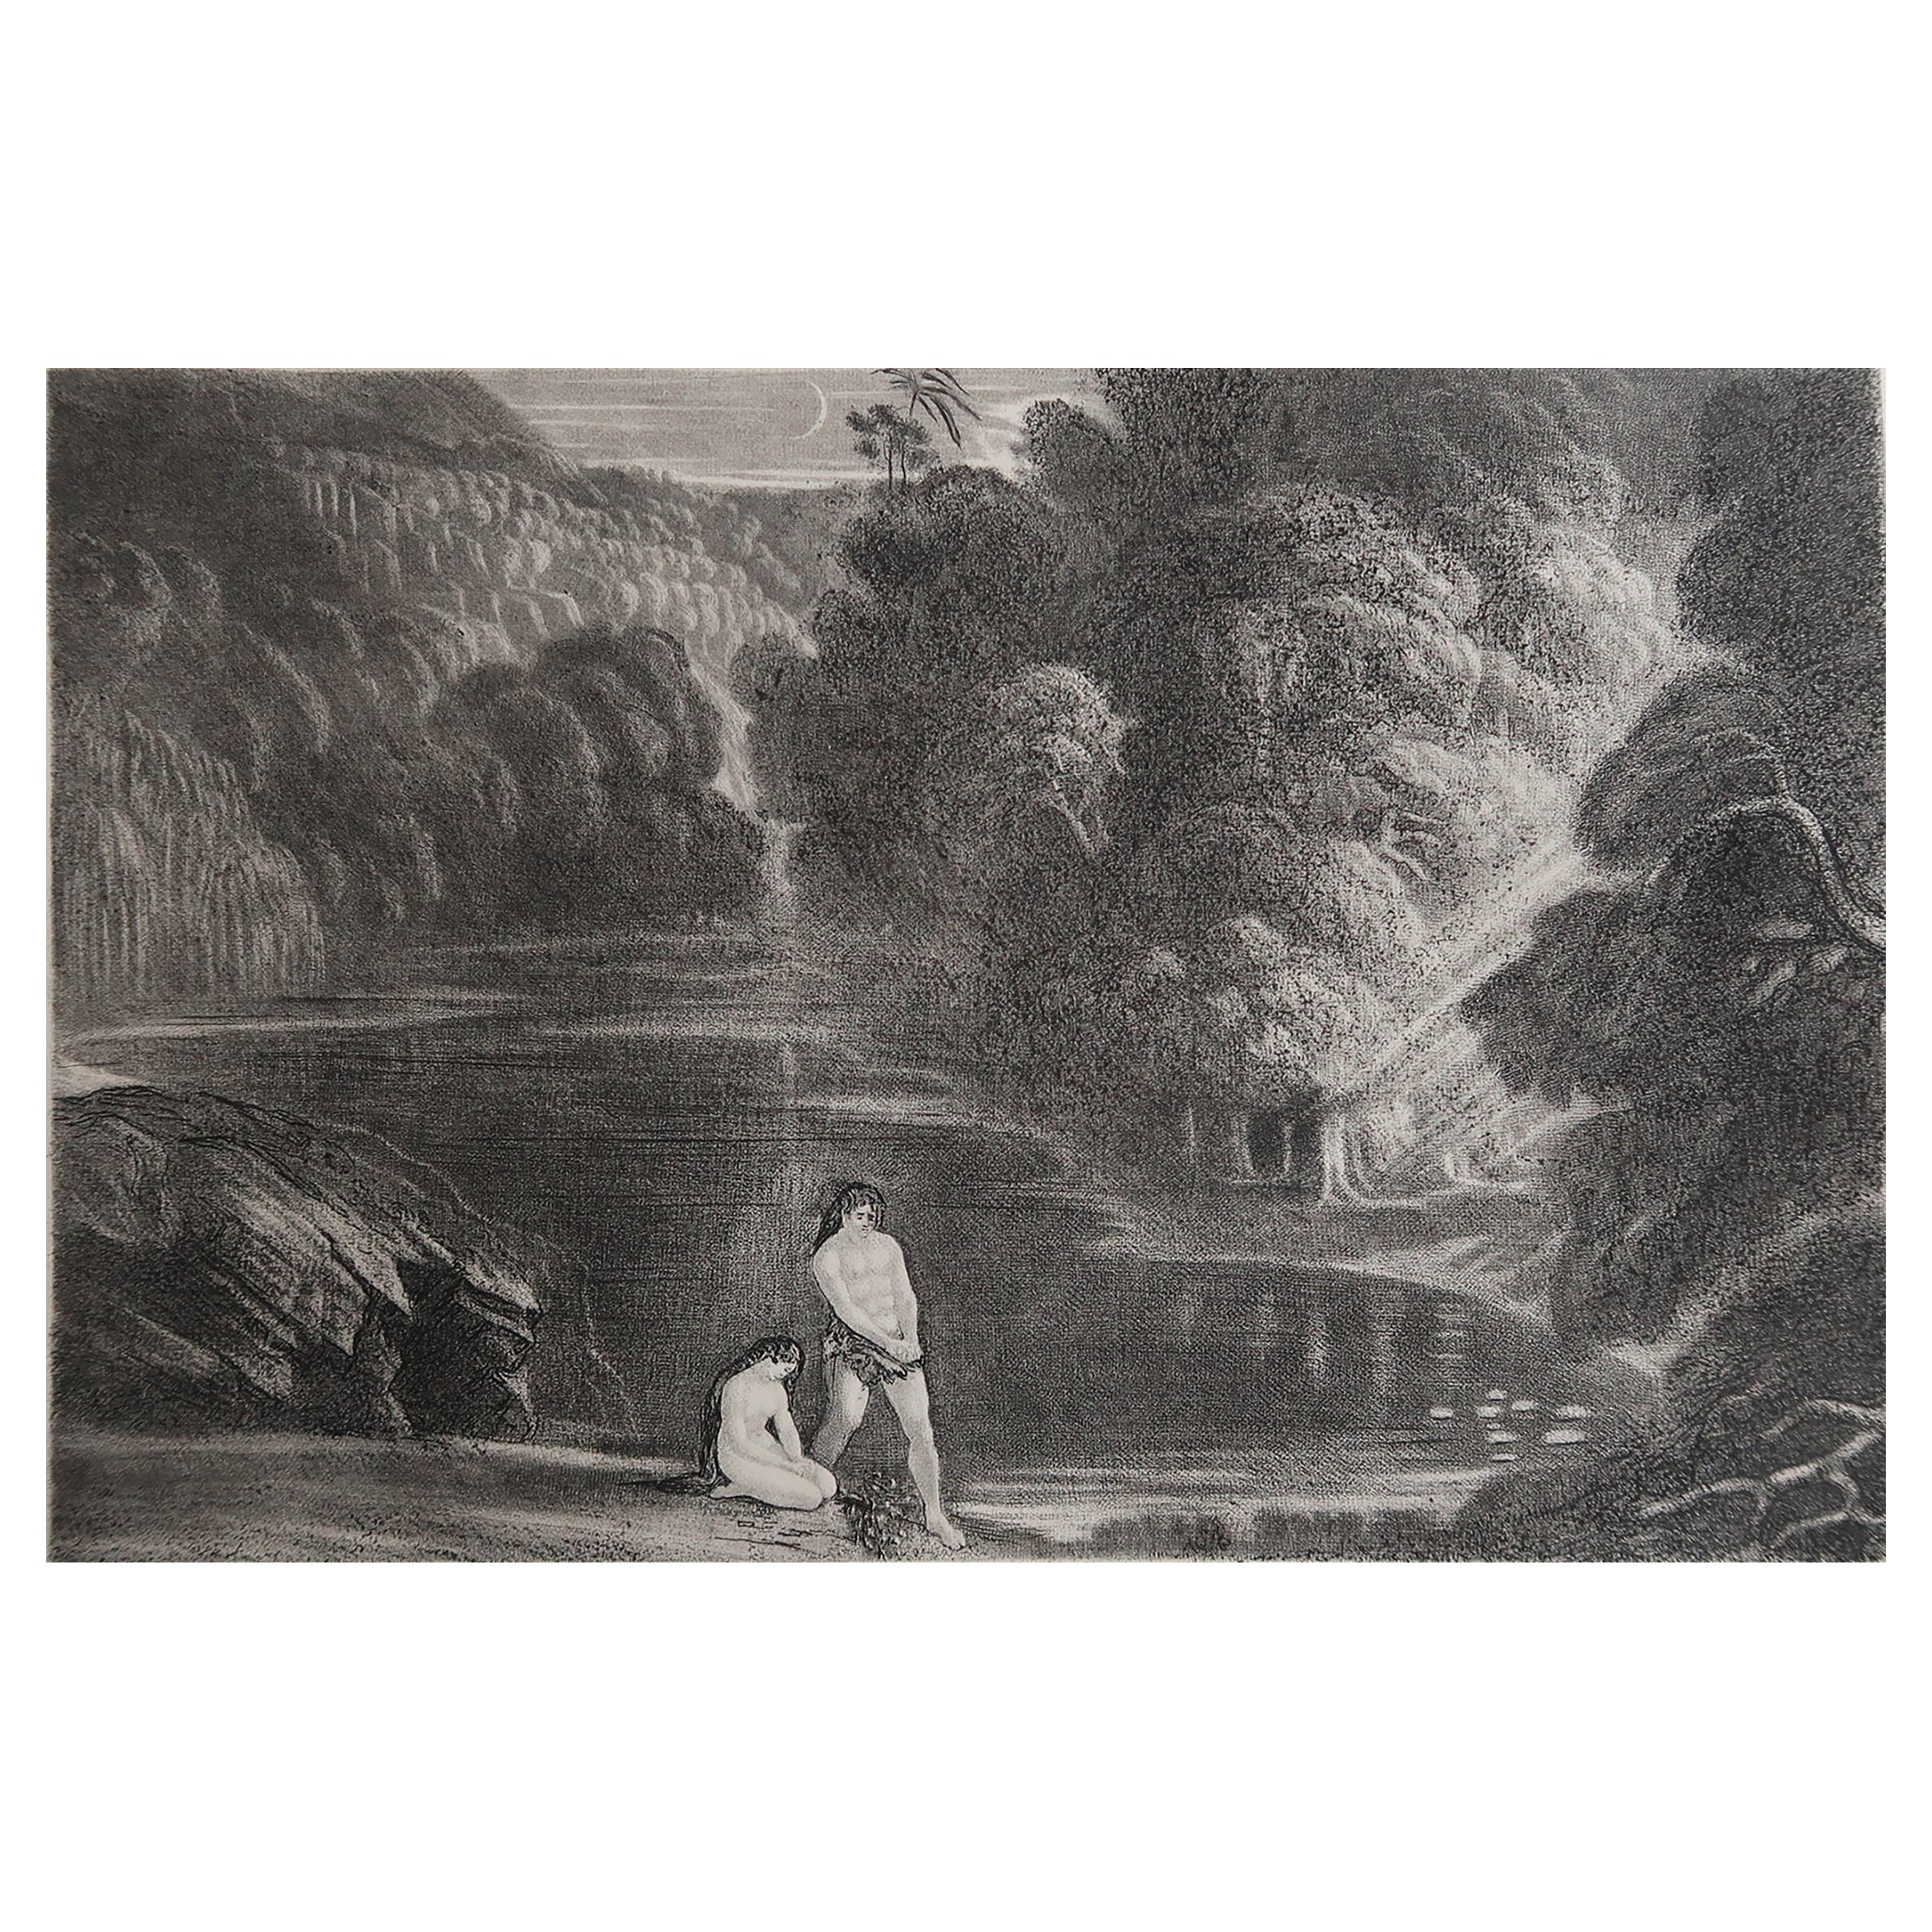 Mezzotint by John Martin, the Judgment of the Almighty, Sangster, circa 1850